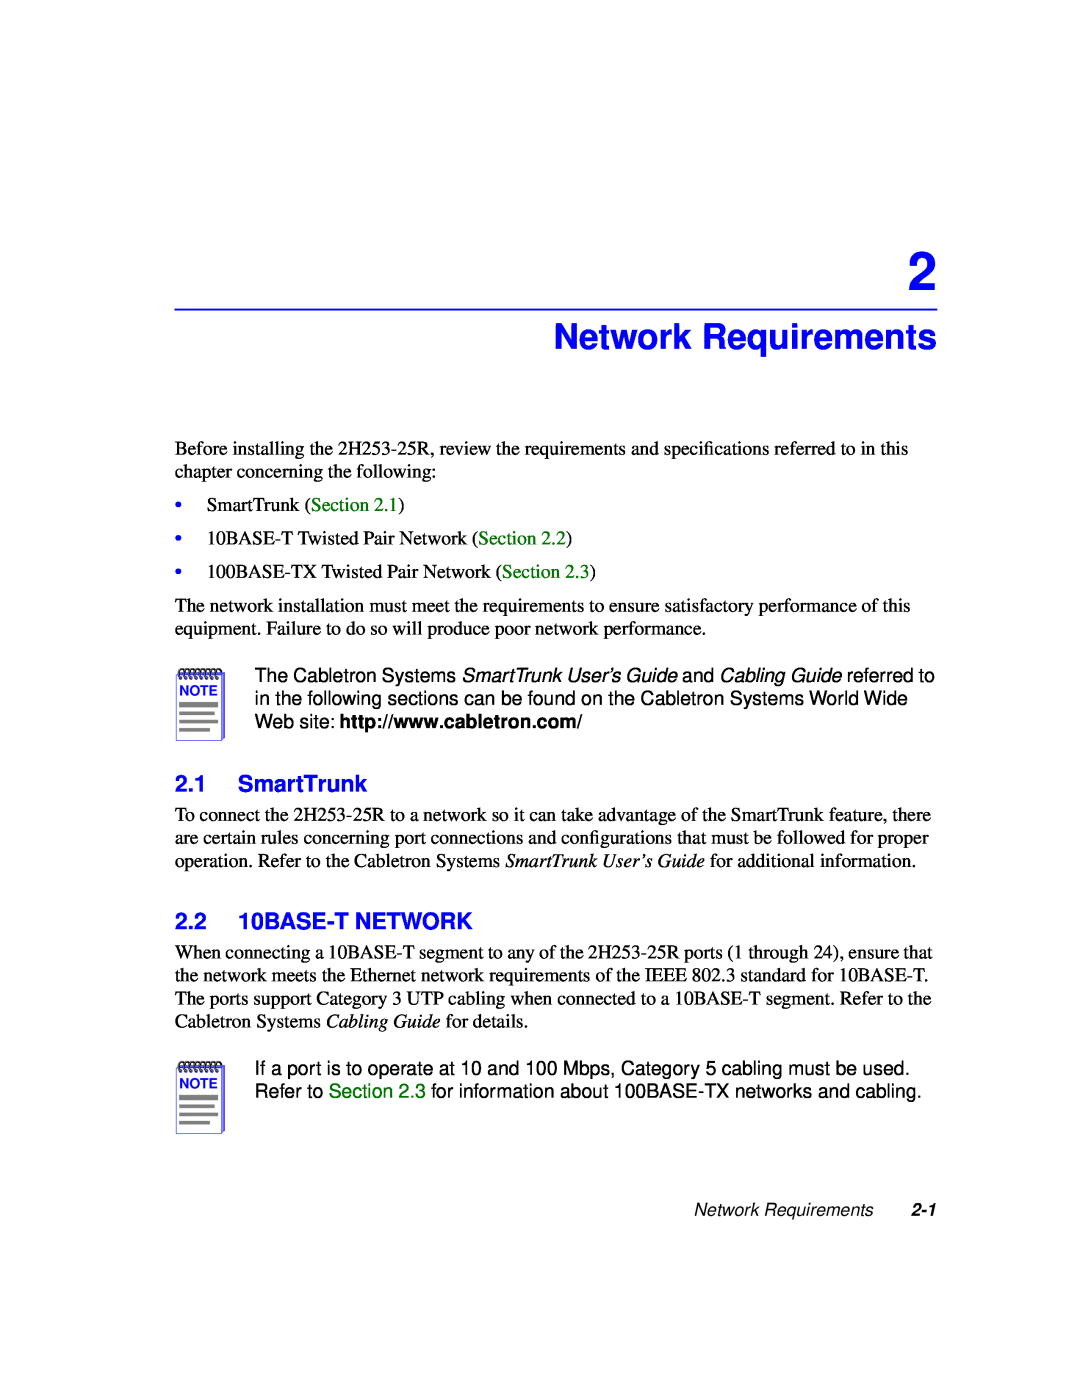 Cabletron Systems 2H253-25R manual Network Requirements, SmartTrunk, 2.2 10BASE-T NETWORK 